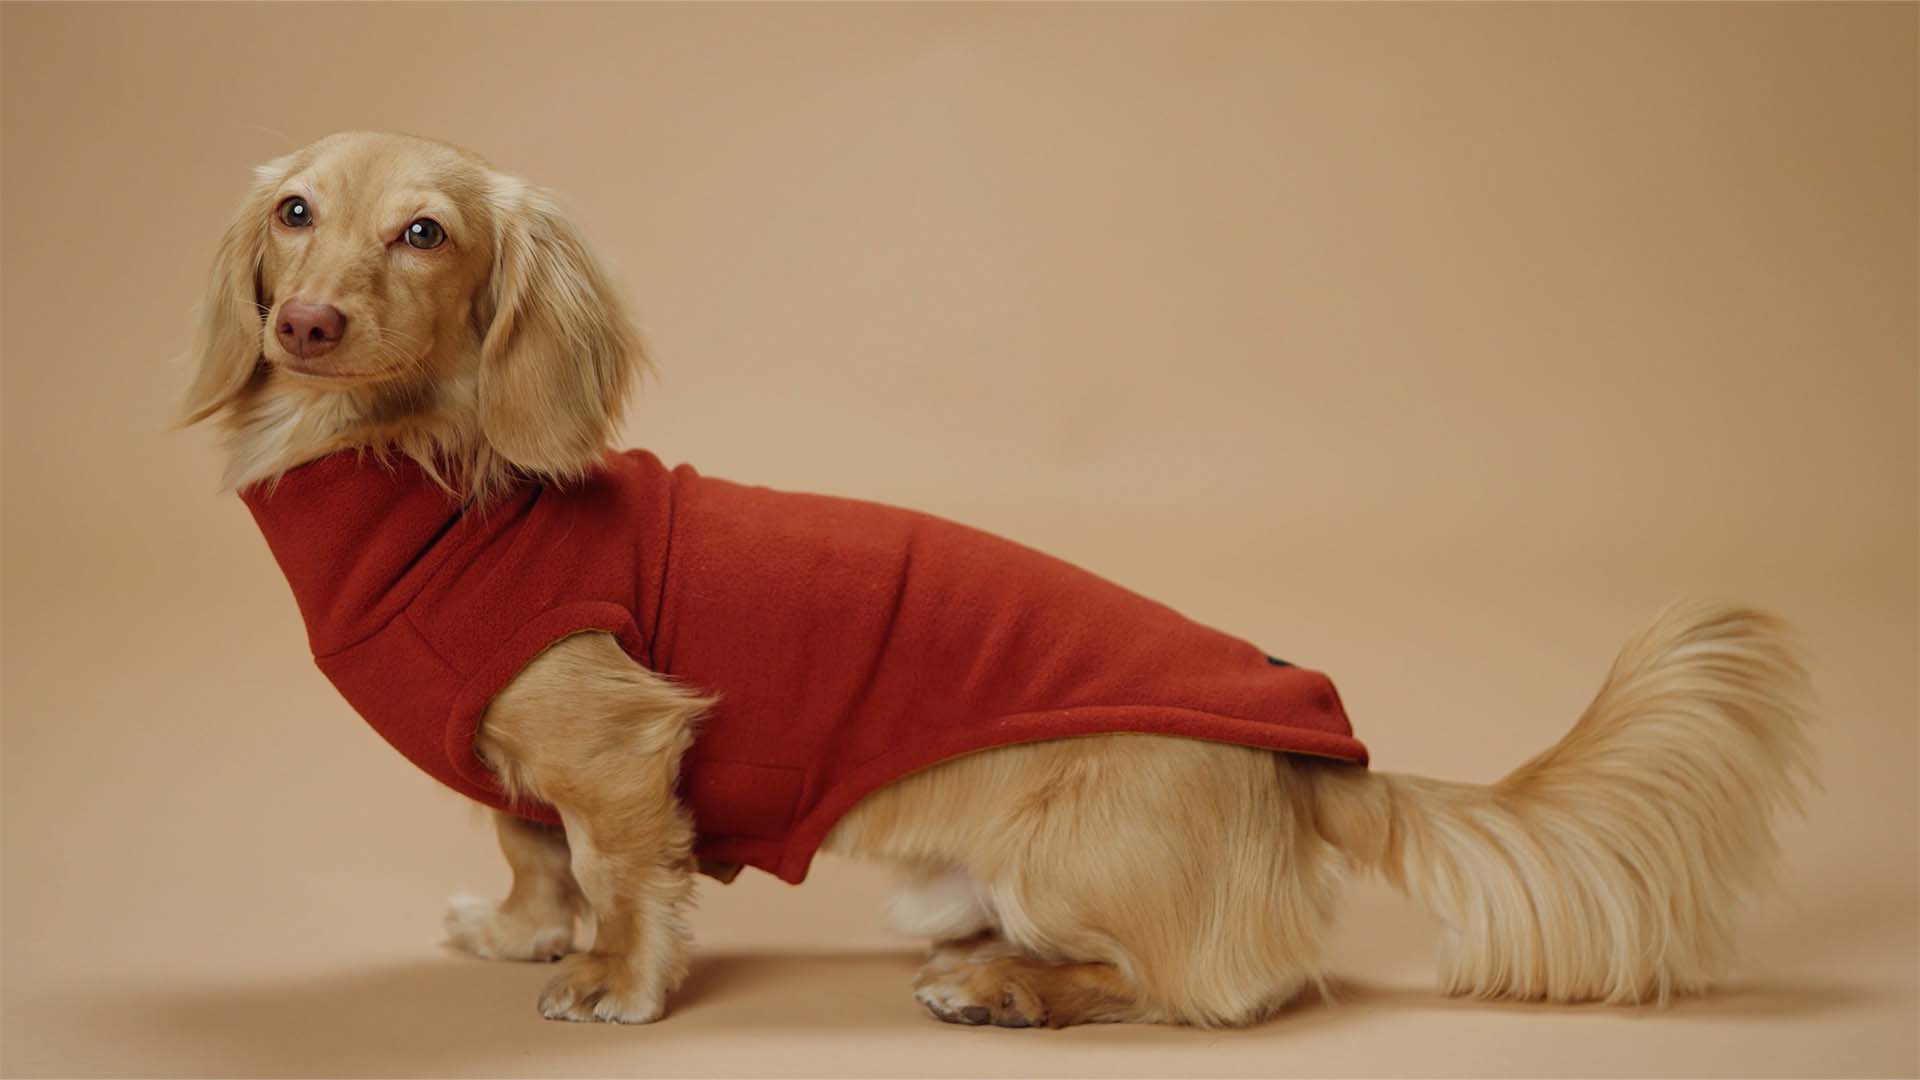 Load video: Longboi product video showing a variety of dachshunds wearing Longboi apparel